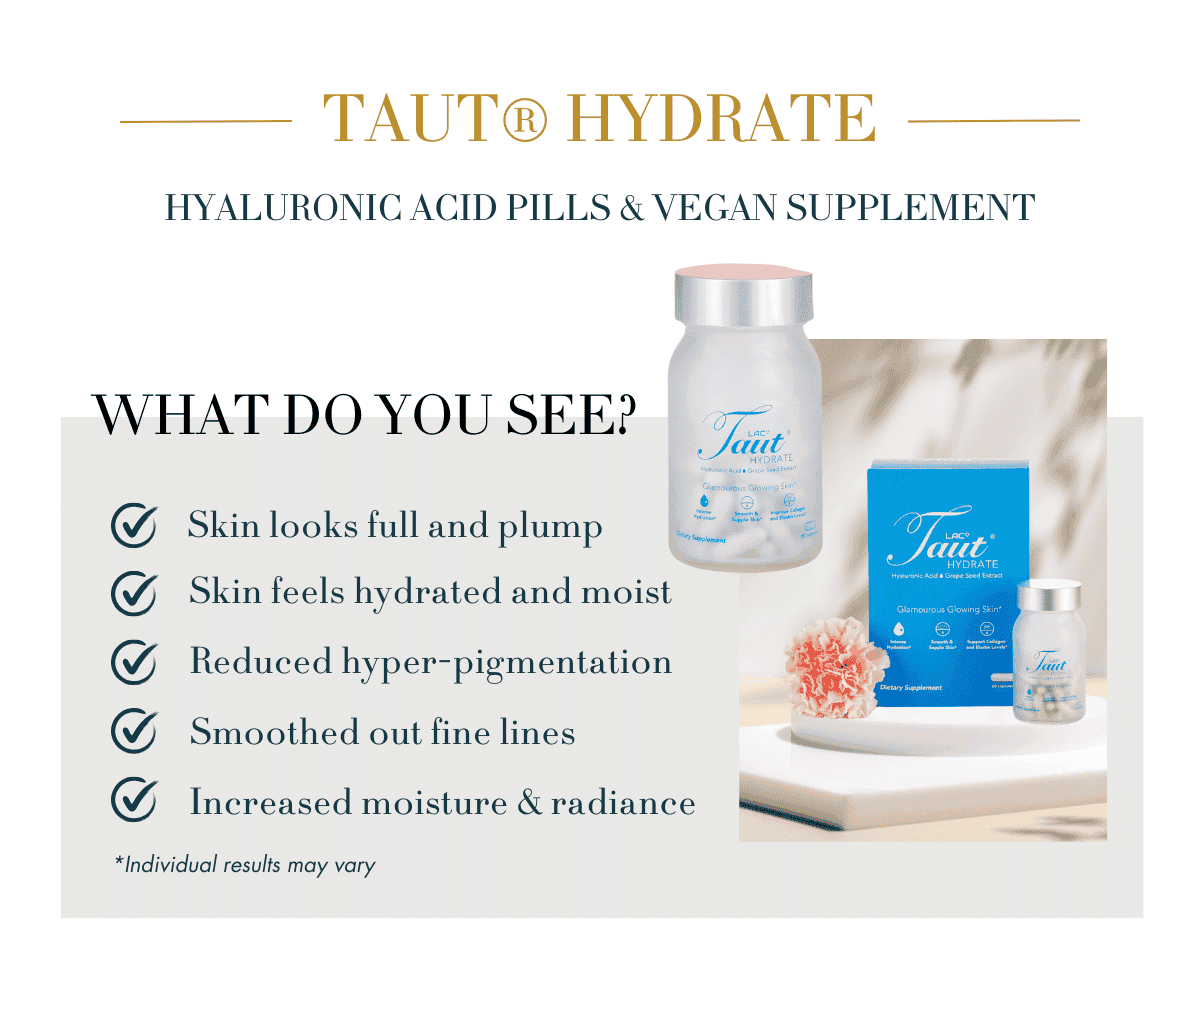 Taut Hydrate